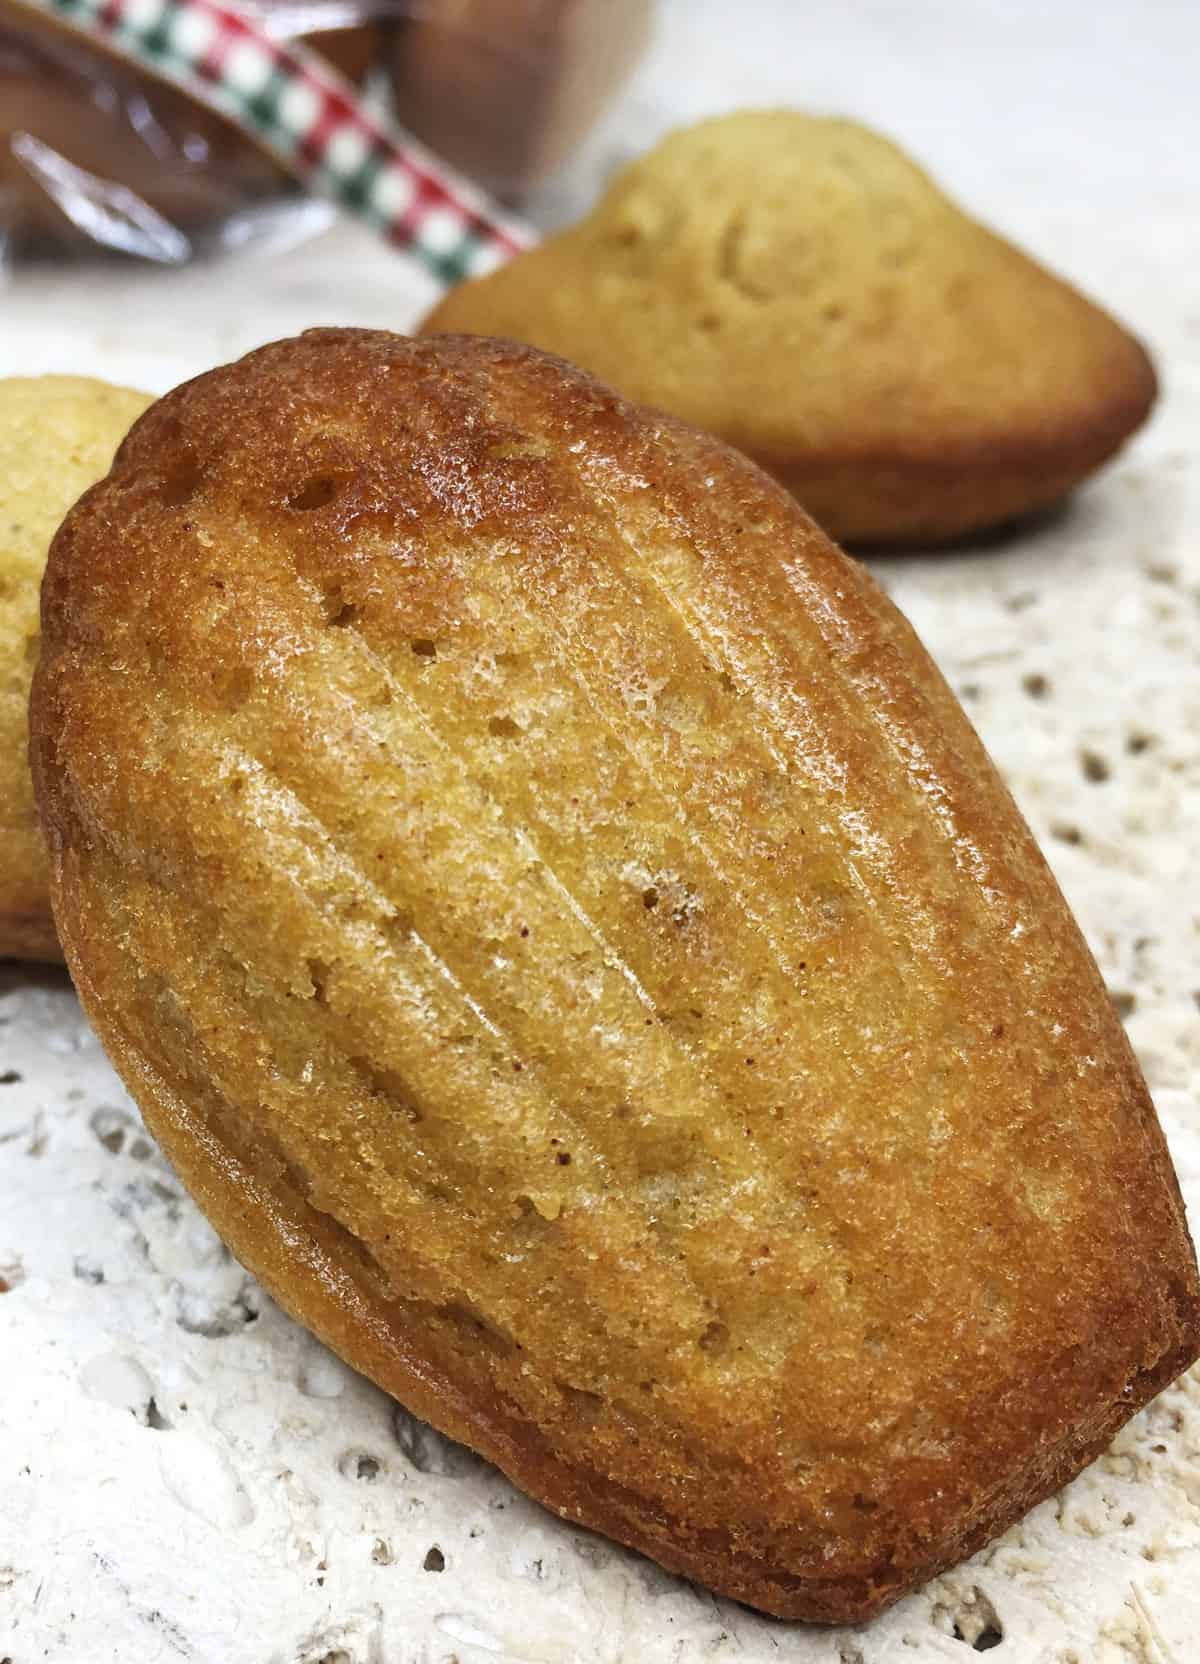 Shell sided madeleine with the rest of the gingerbread madeleines in the background